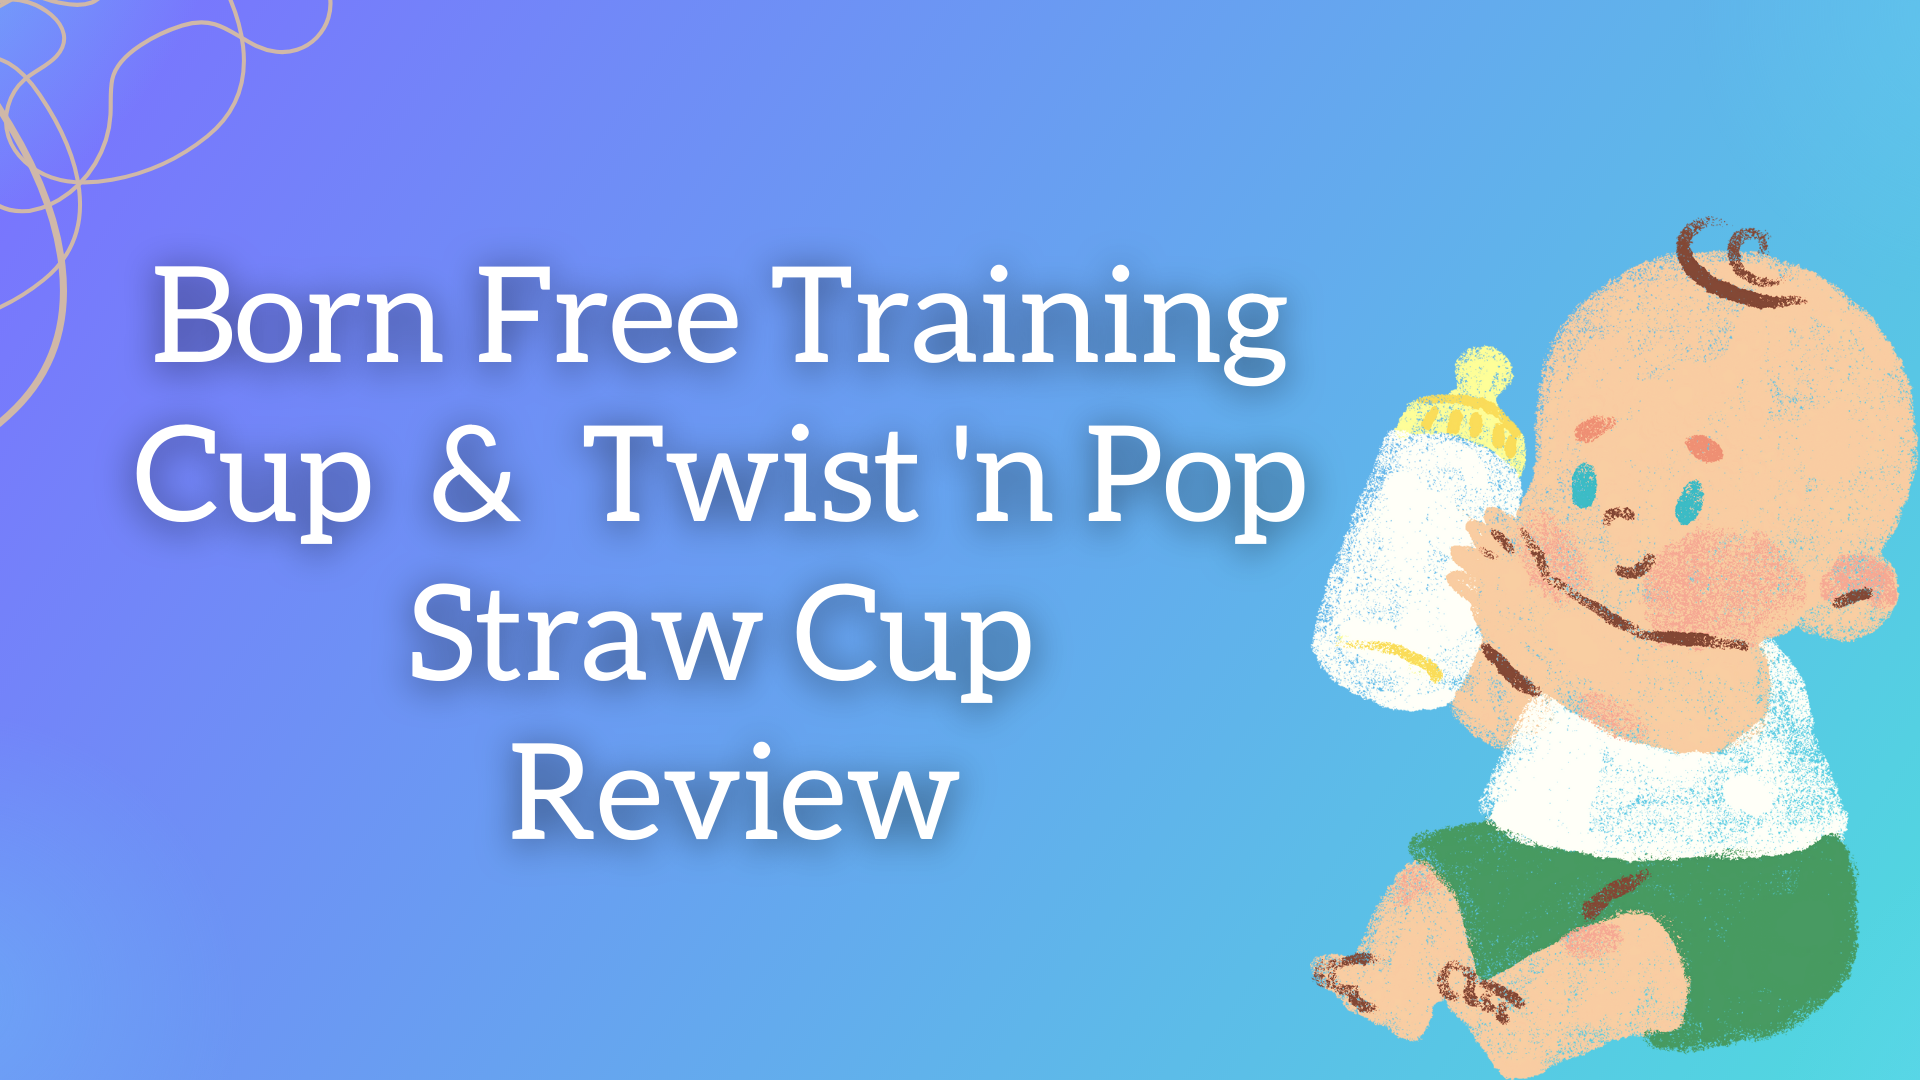 Born Free Training Cup and Twist 'n Pop Straw Cup Review